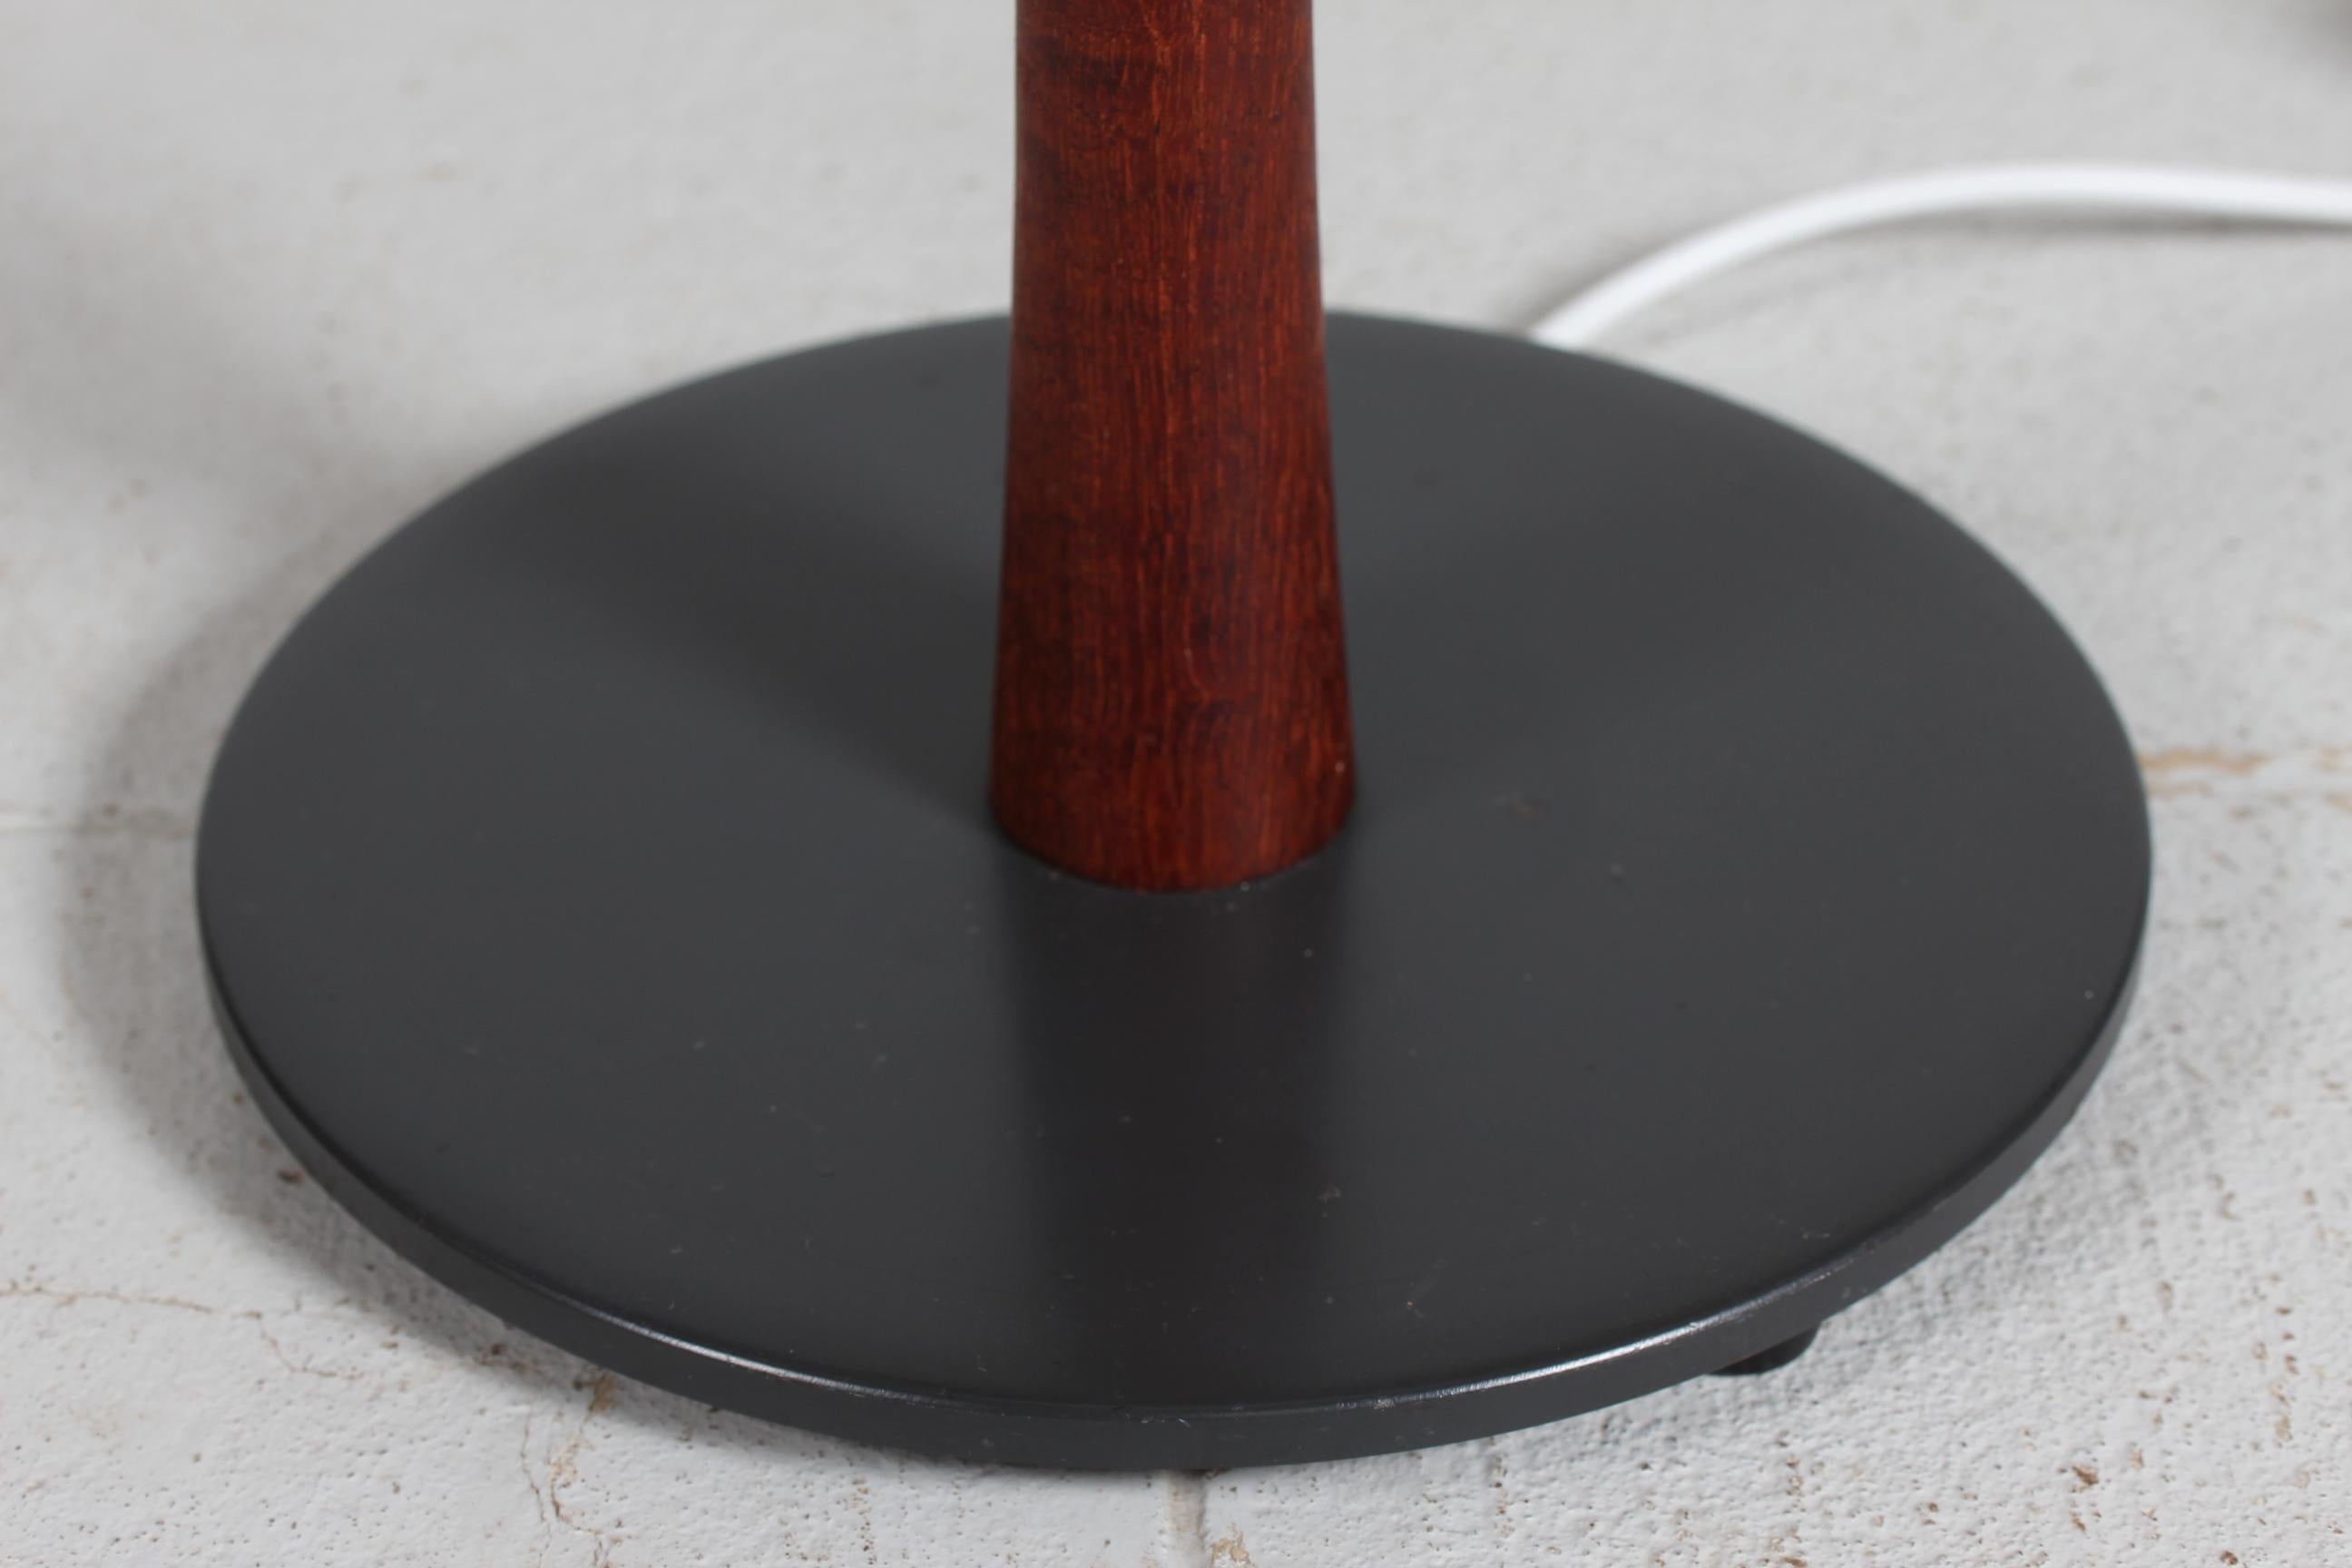 Danish lightning design, floor lamp from the 1960´s made of teak and with lamp foot of black lacquered metal.

Included is a new lampshade designed in Denmark.
The shade is made of woven fabric with some texture and the color is white. It has a